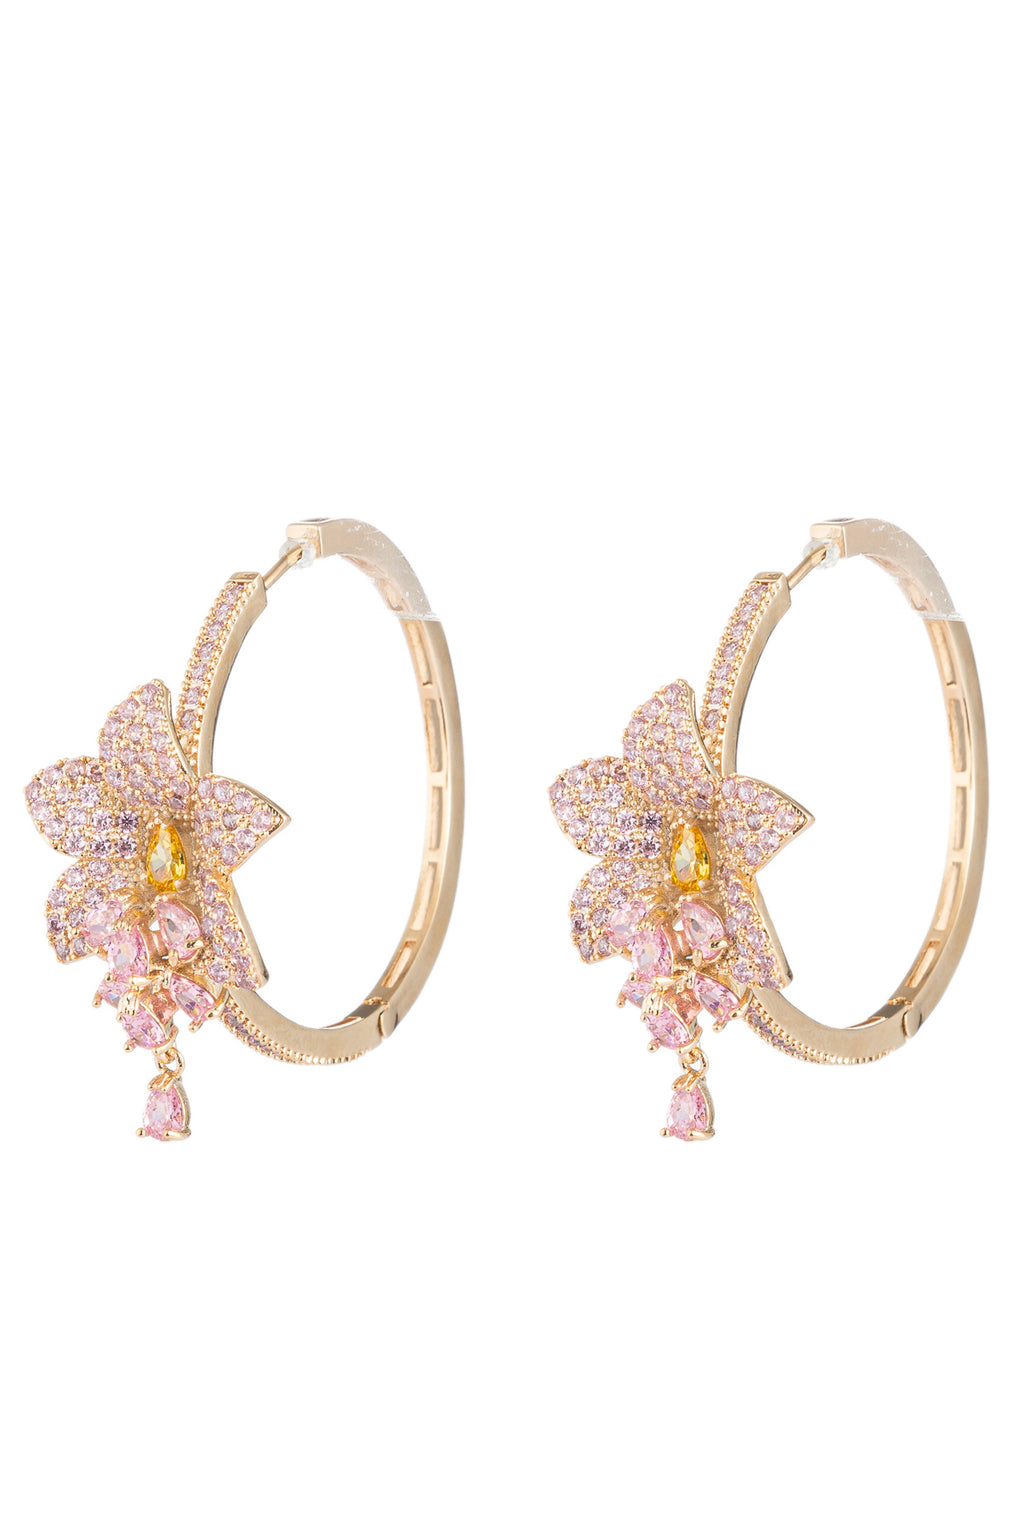 18k gold plated violet rose earrings studded with CZ crystals.